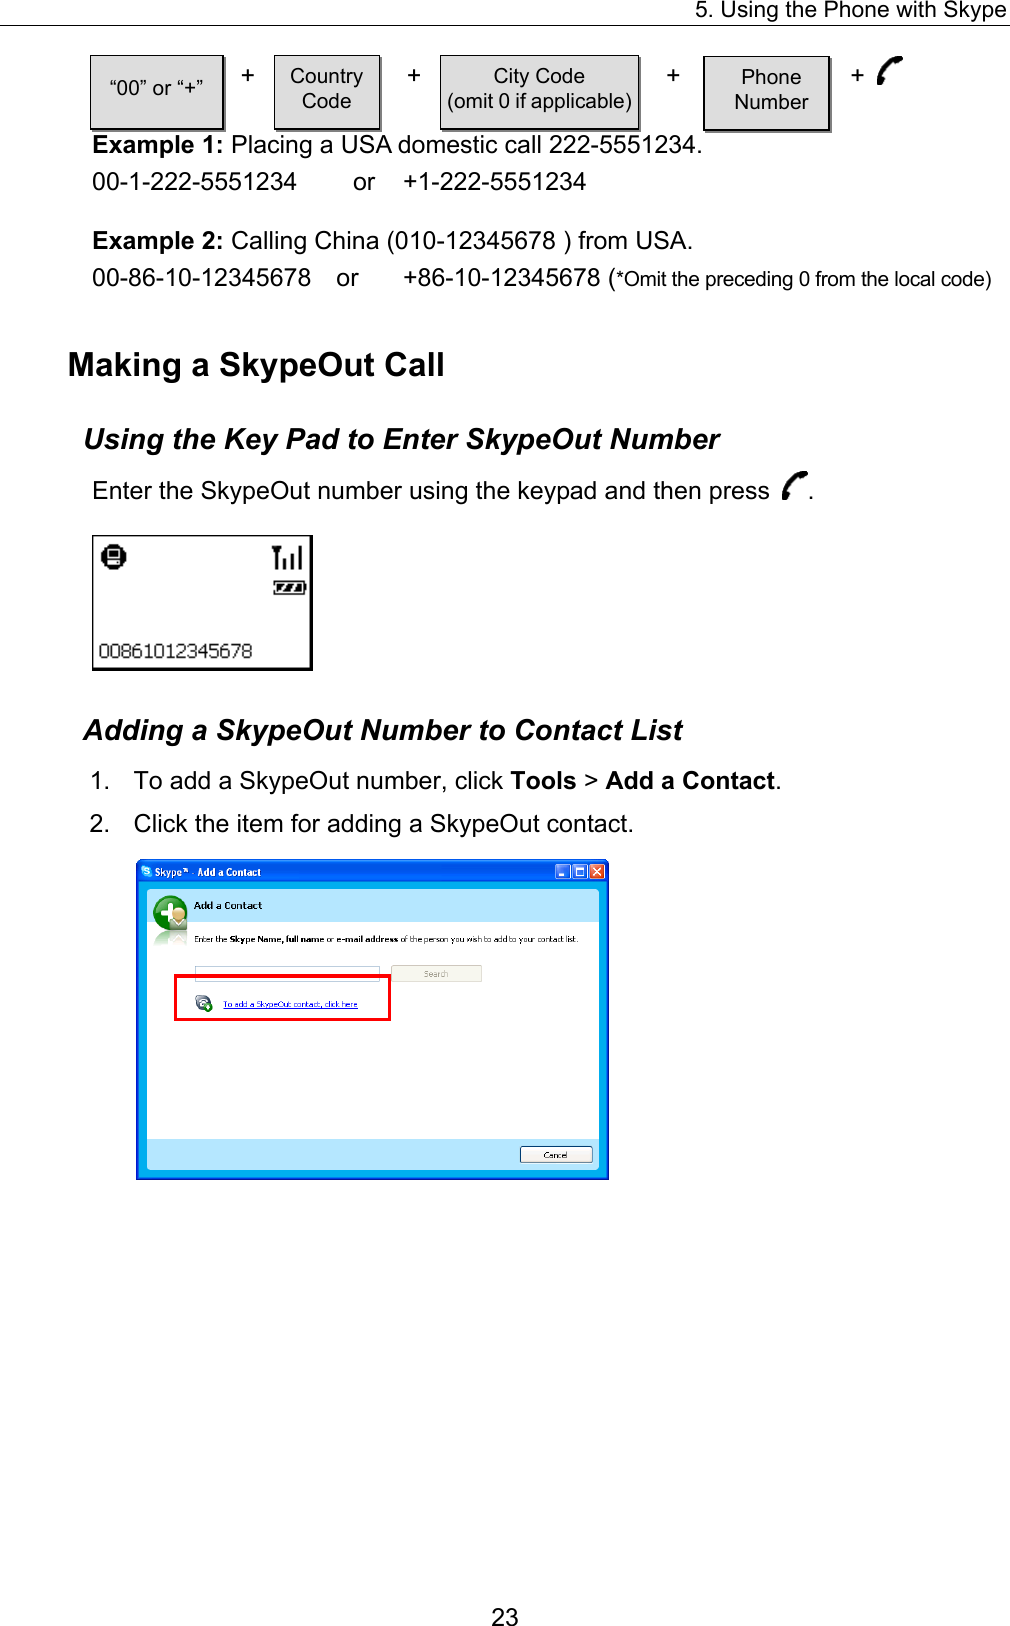 5. Using the Phone with Skype  +  +  +  +  Example 1: Placing a USA domestic call 222-5551234. 00-1-222-5551234   or  +1-222-5551234 “00” or “+”  Country Code City Code (omit 0 if applicable) Phone  Number Example 2: Calling China (010-12345678 ) from USA. 00-86-10-12345678  or  +86-10-12345678 (*Omit the preceding 0 from the local code) Making a SkypeOut Call Using the Key Pad to Enter SkypeOut Number Enter the SkypeOut number using the keypad and then press  .  Adding a SkypeOut Number to Contact List 1.  To add a SkypeOut number, click Tools &gt; Add a Contact.  2.  Click the item for adding a SkypeOut contact.    23 